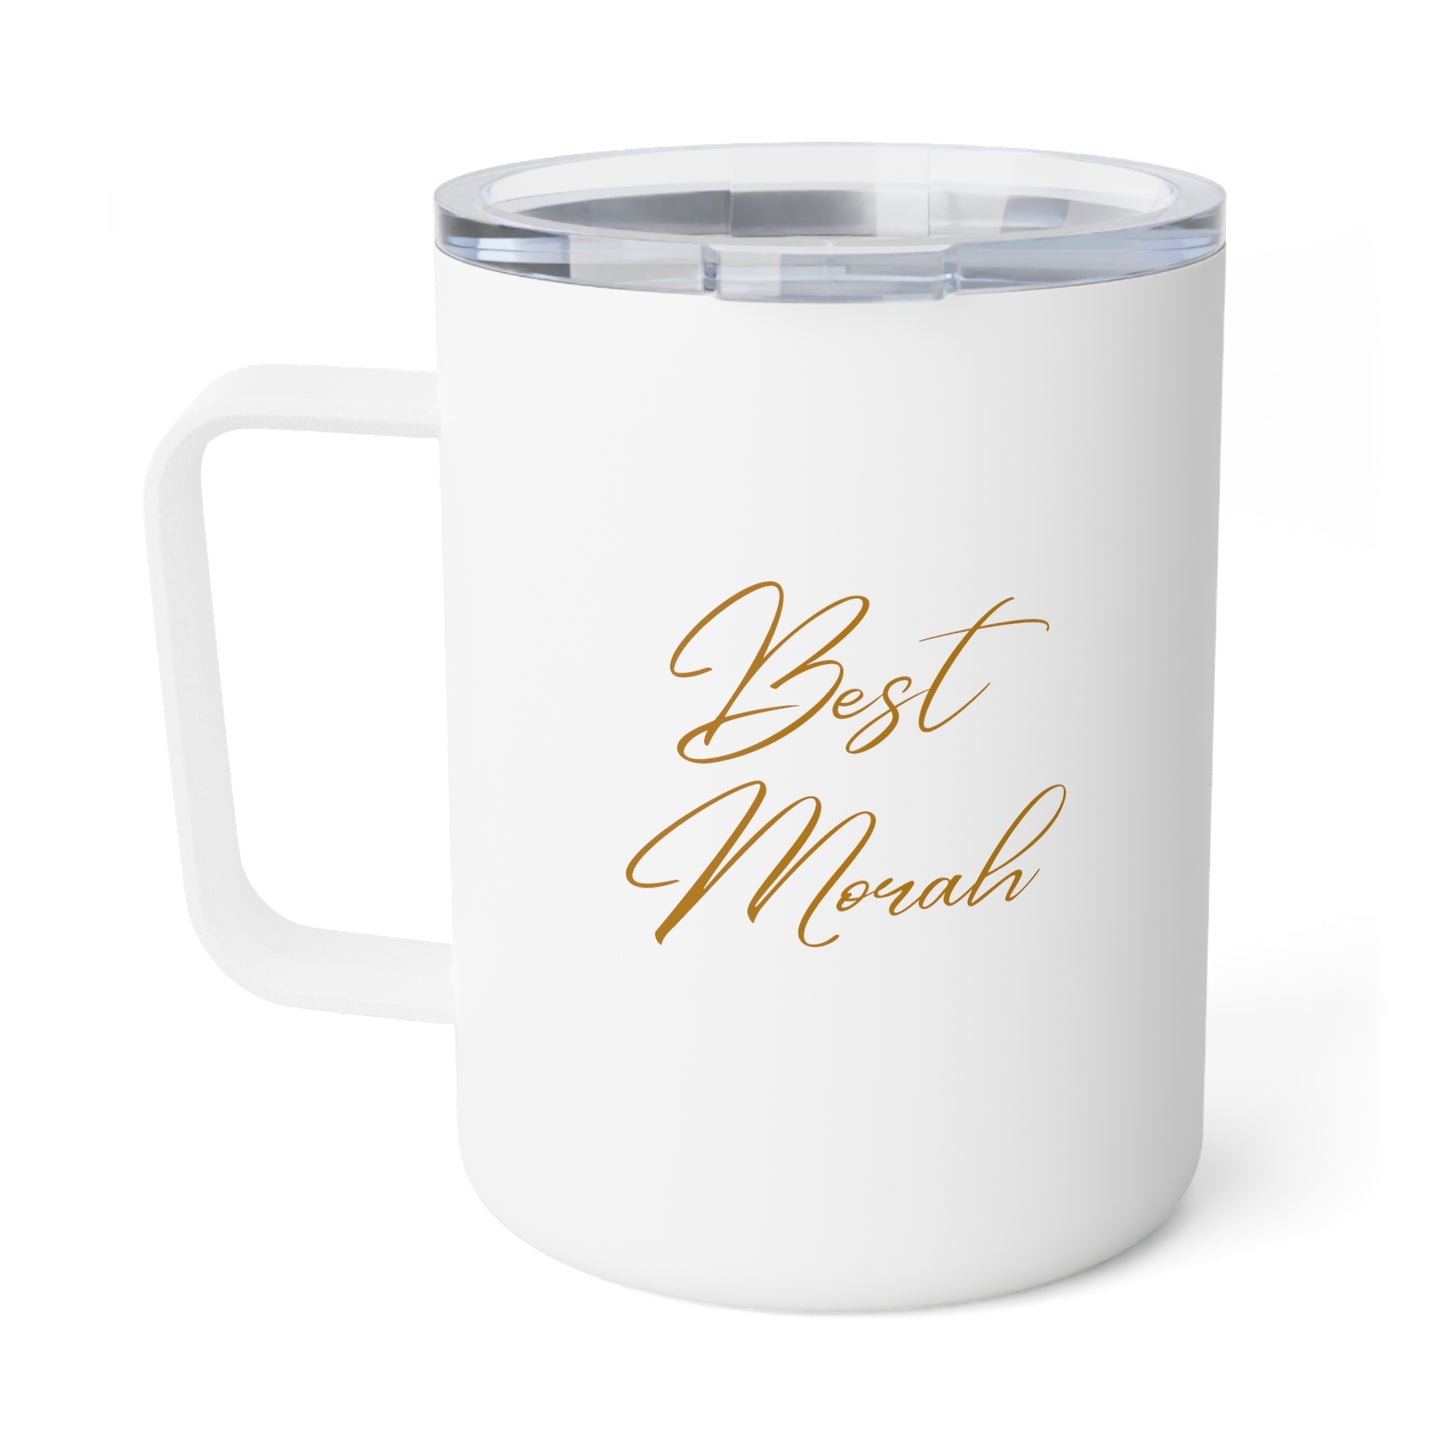 Thank you for filling my cup with קאפ - Best Morah, Insulated Mug, 10oz